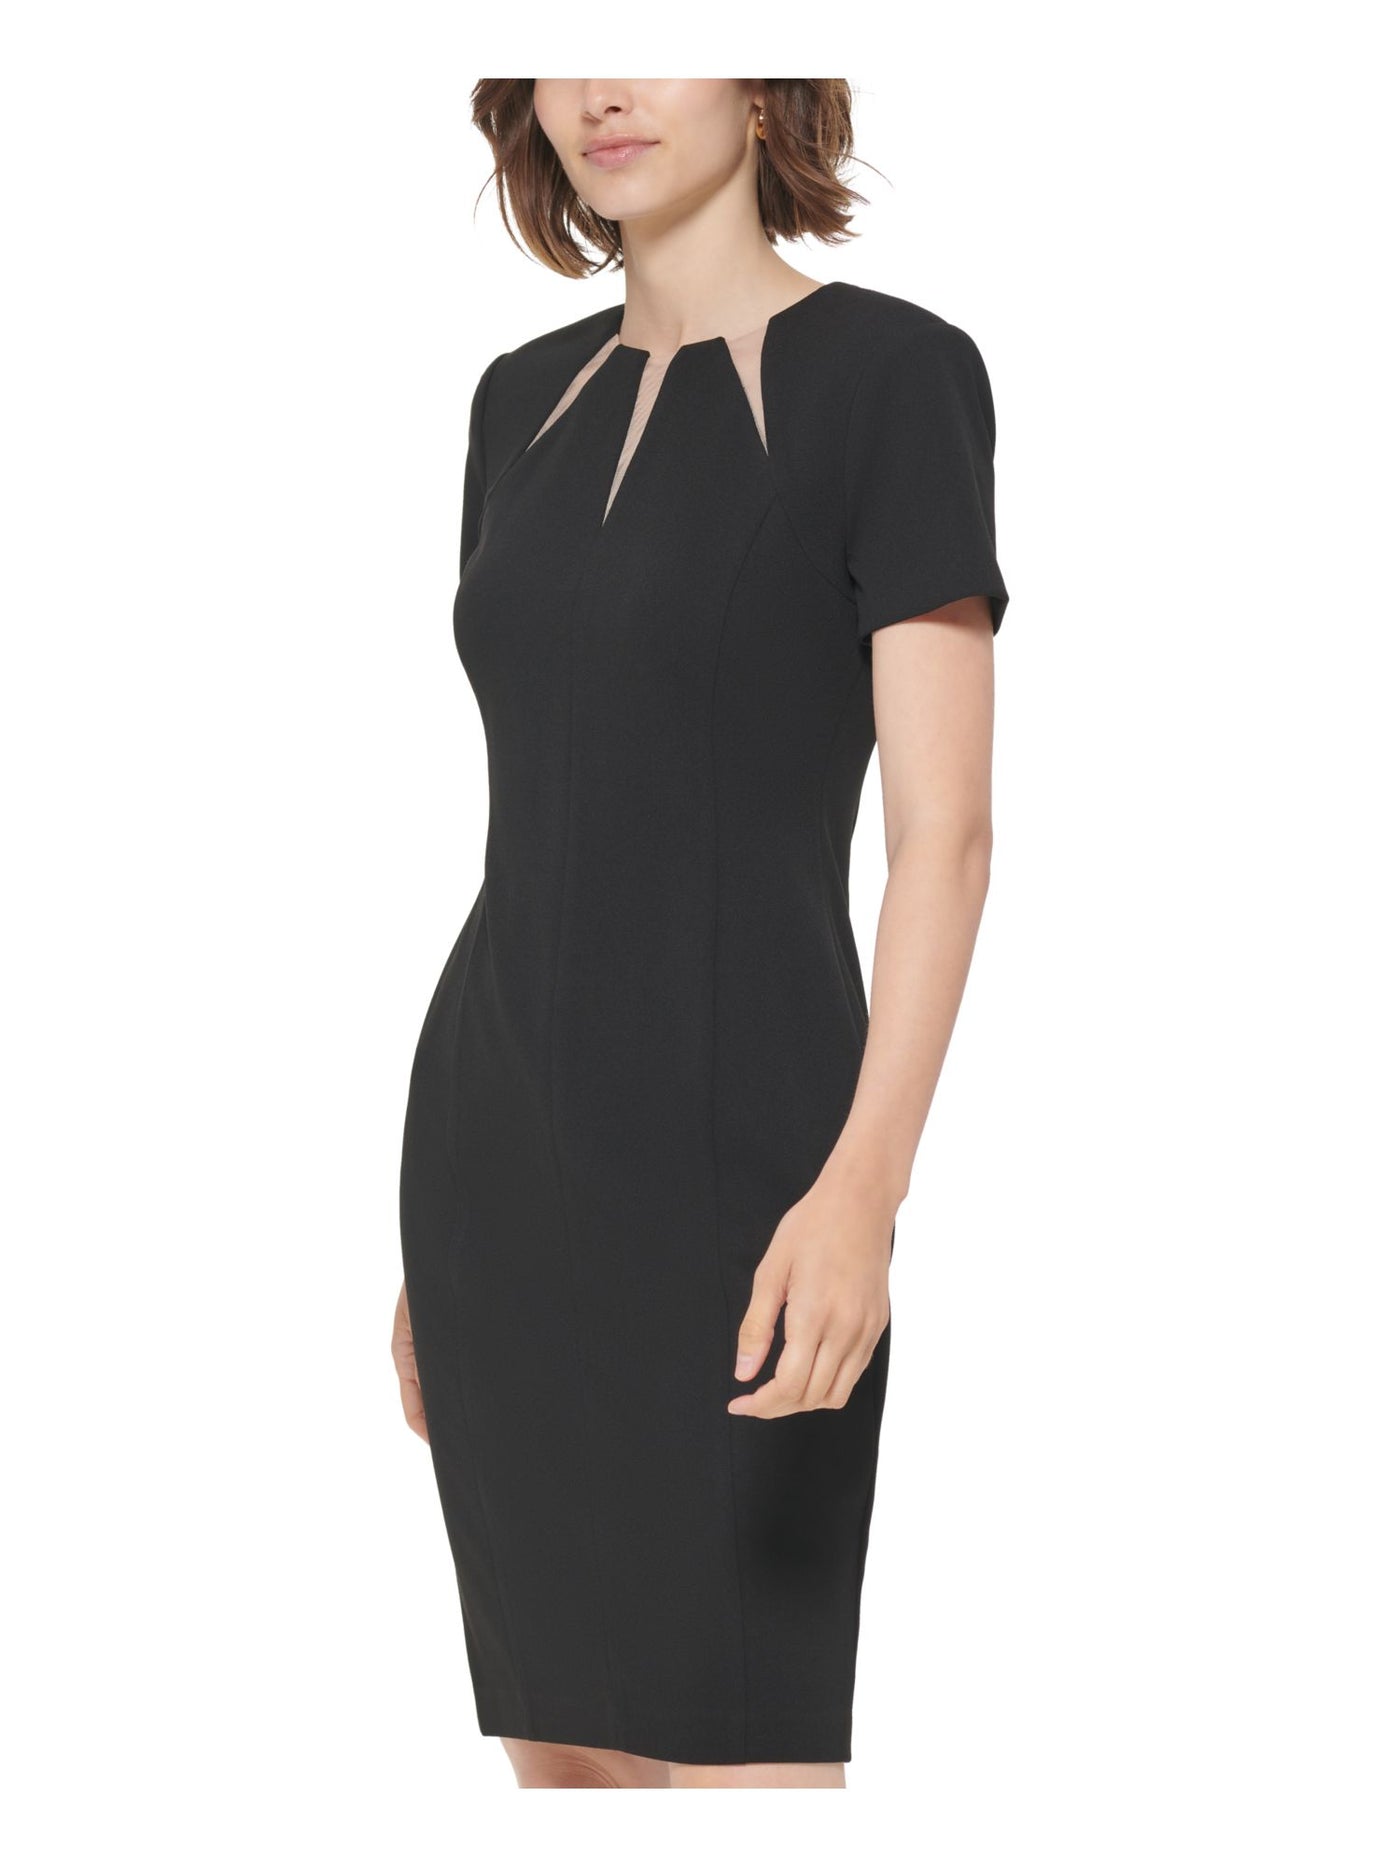 CALVIN KLEIN Womens Black Cut Out Zippered Short Sleeve Round Neck Above The Knee Wear To Work Sheath Dress 2